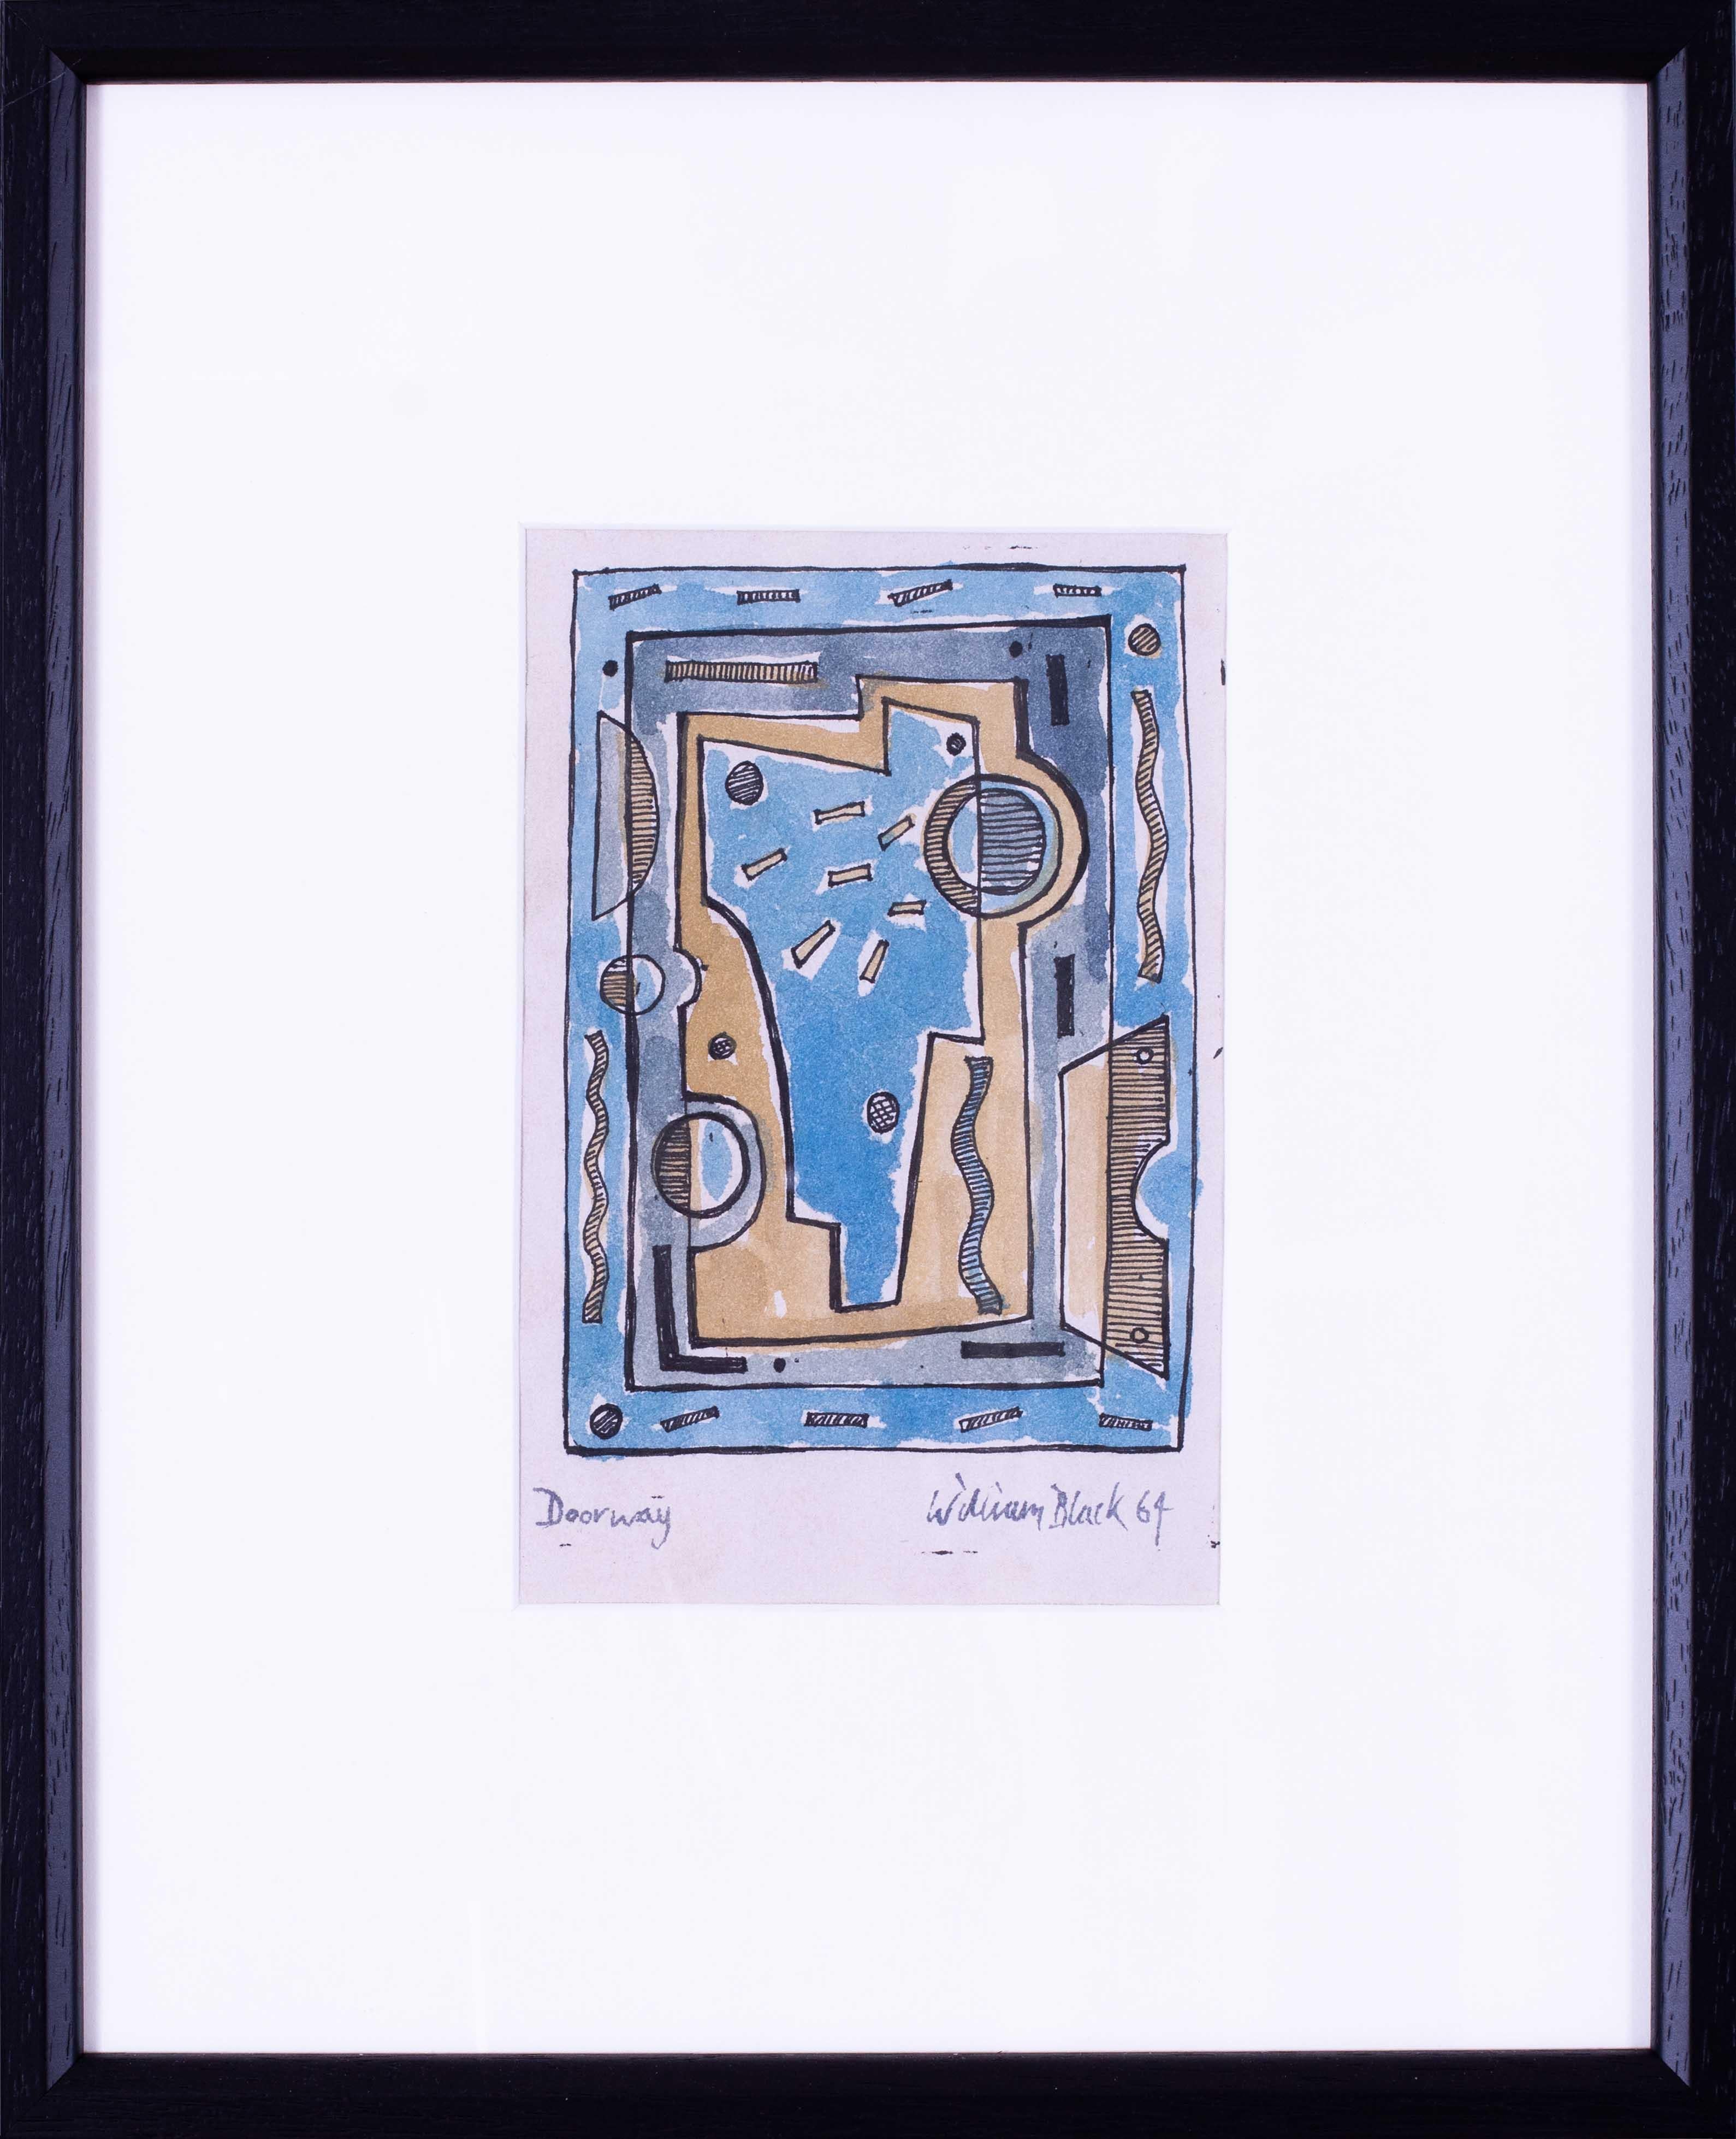 William Black (British, Fl. 1963 – 69)
Doorway
Ink and watercolour on paper
Signed, inscribed and dated ‘Doorway William Black 64’ (lower edge)
7.1/2 x 4.7/8 in. (19.2 x 12.4 cm.) (to site edge)

William Black is a little known and underrated member